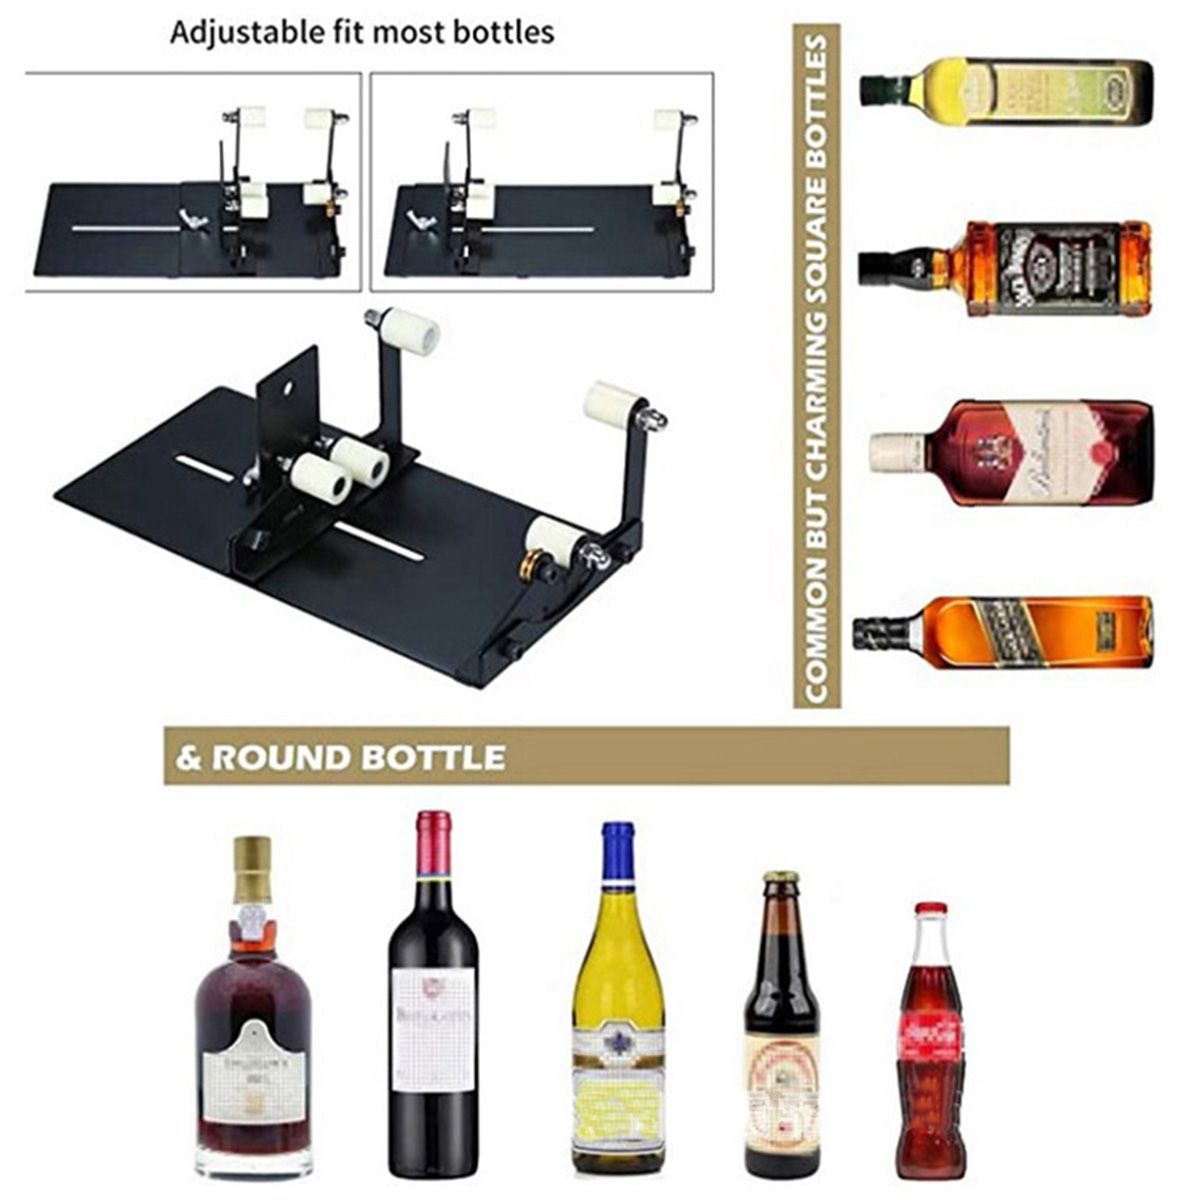 DIY-Glass-Bottle-Cutter-Cutting-Tool-Upgrade-Version-Square-amp-Round-Cutting-1736554